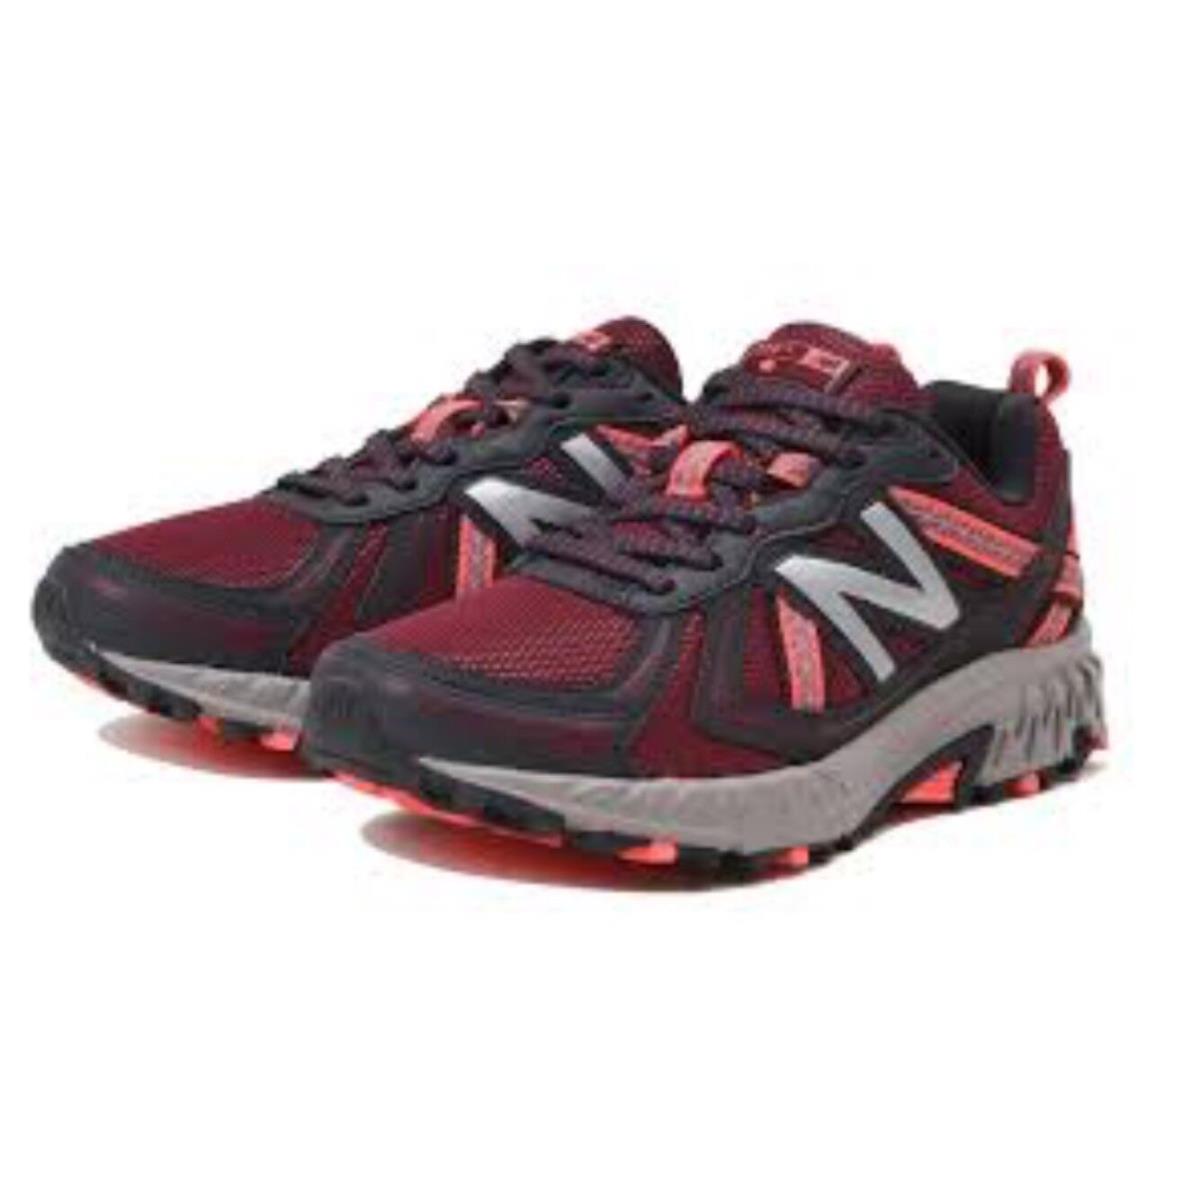 New Women s New Balance Wt410cx5 Trail Running Shoes Size 5.5 D Wide